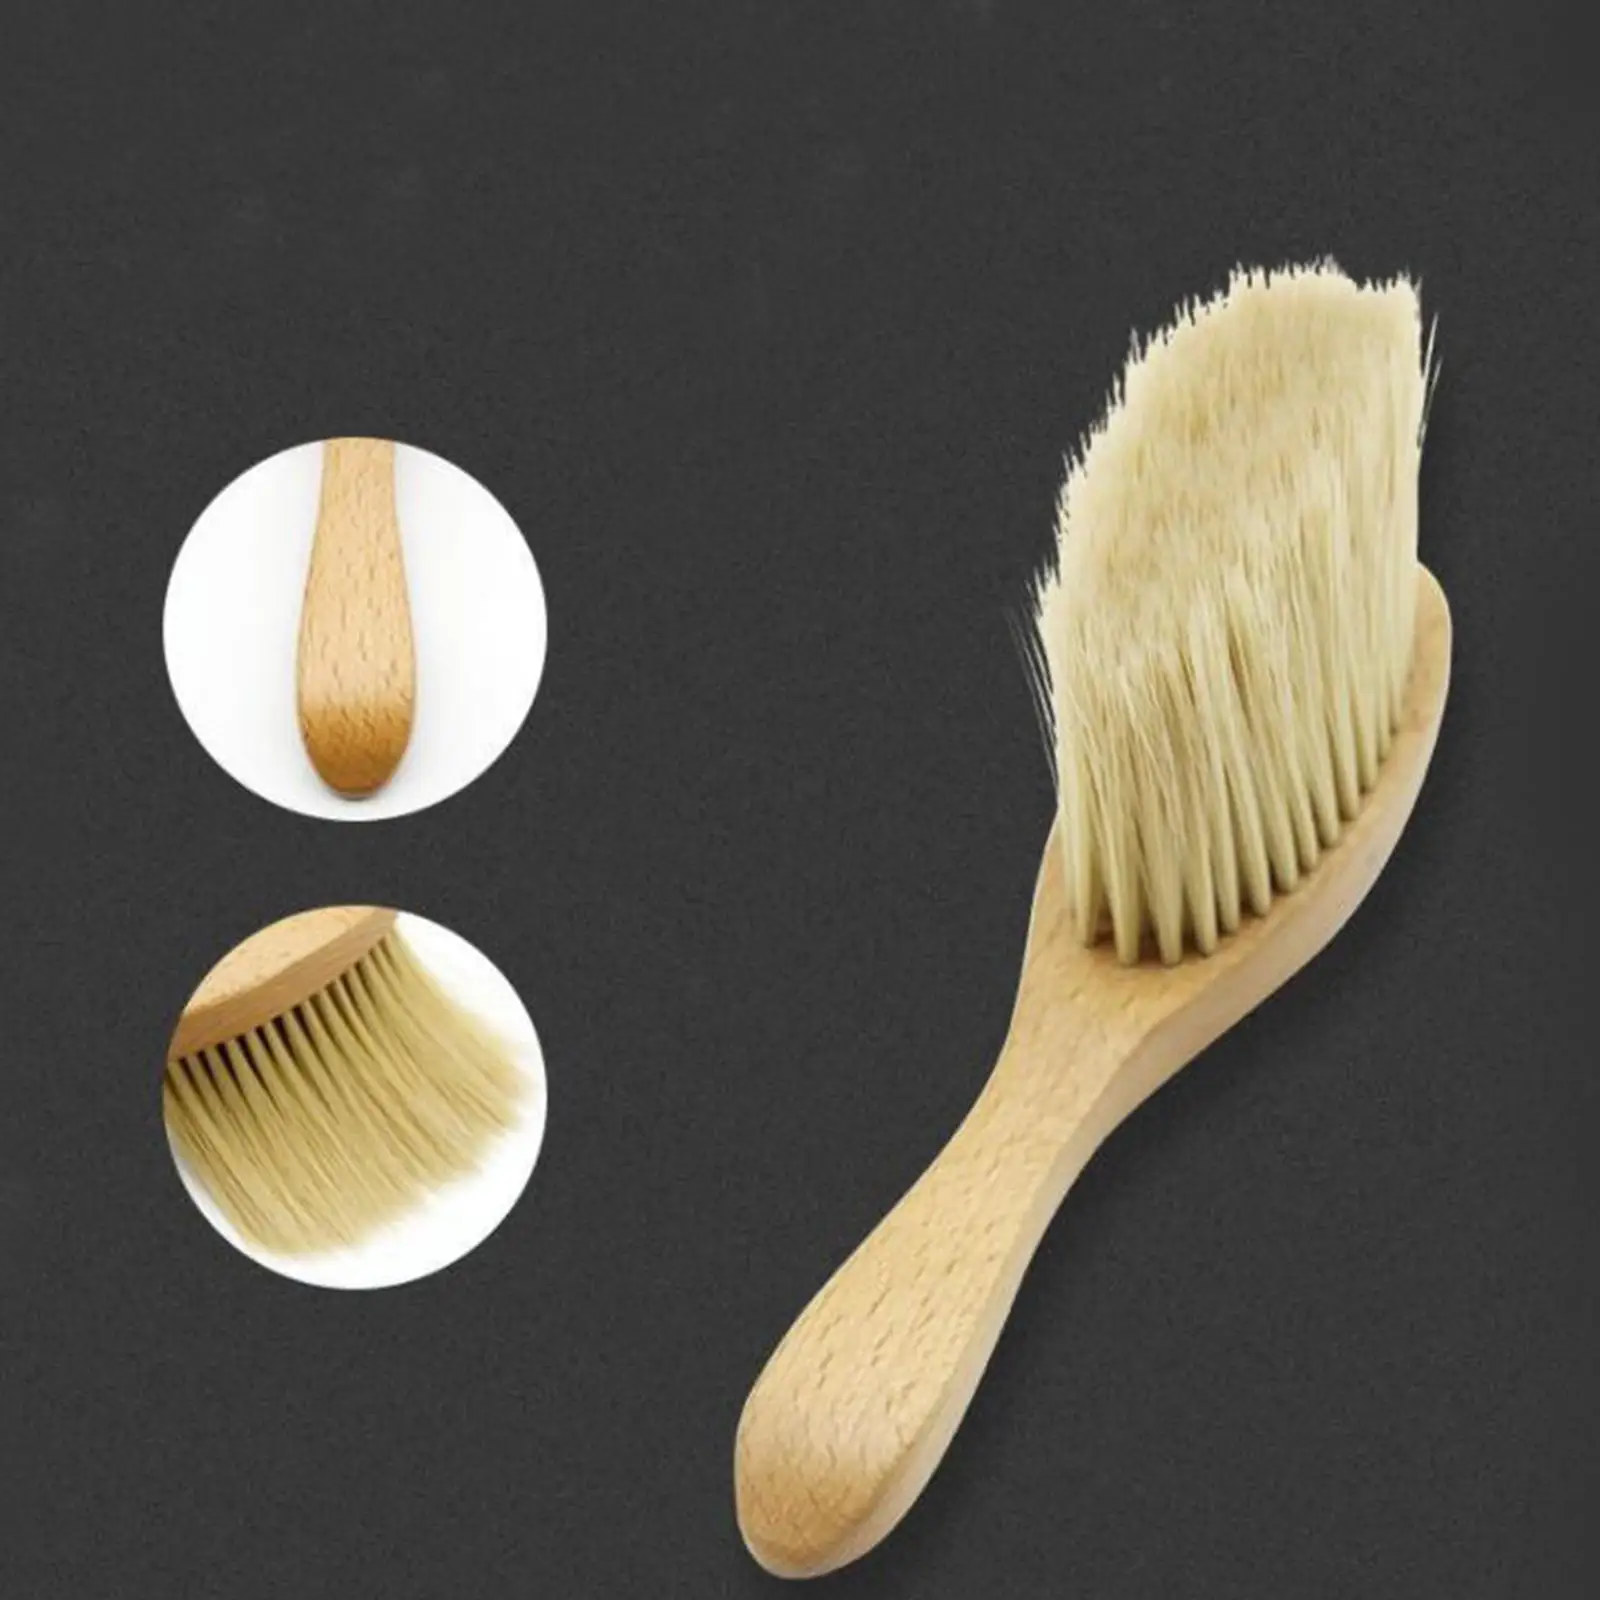 Nylon Soft Hair Sweeping Brush With Handle Wood Hairdressing Hair Cleaning Brush for Salon Household Hair Styling Tool